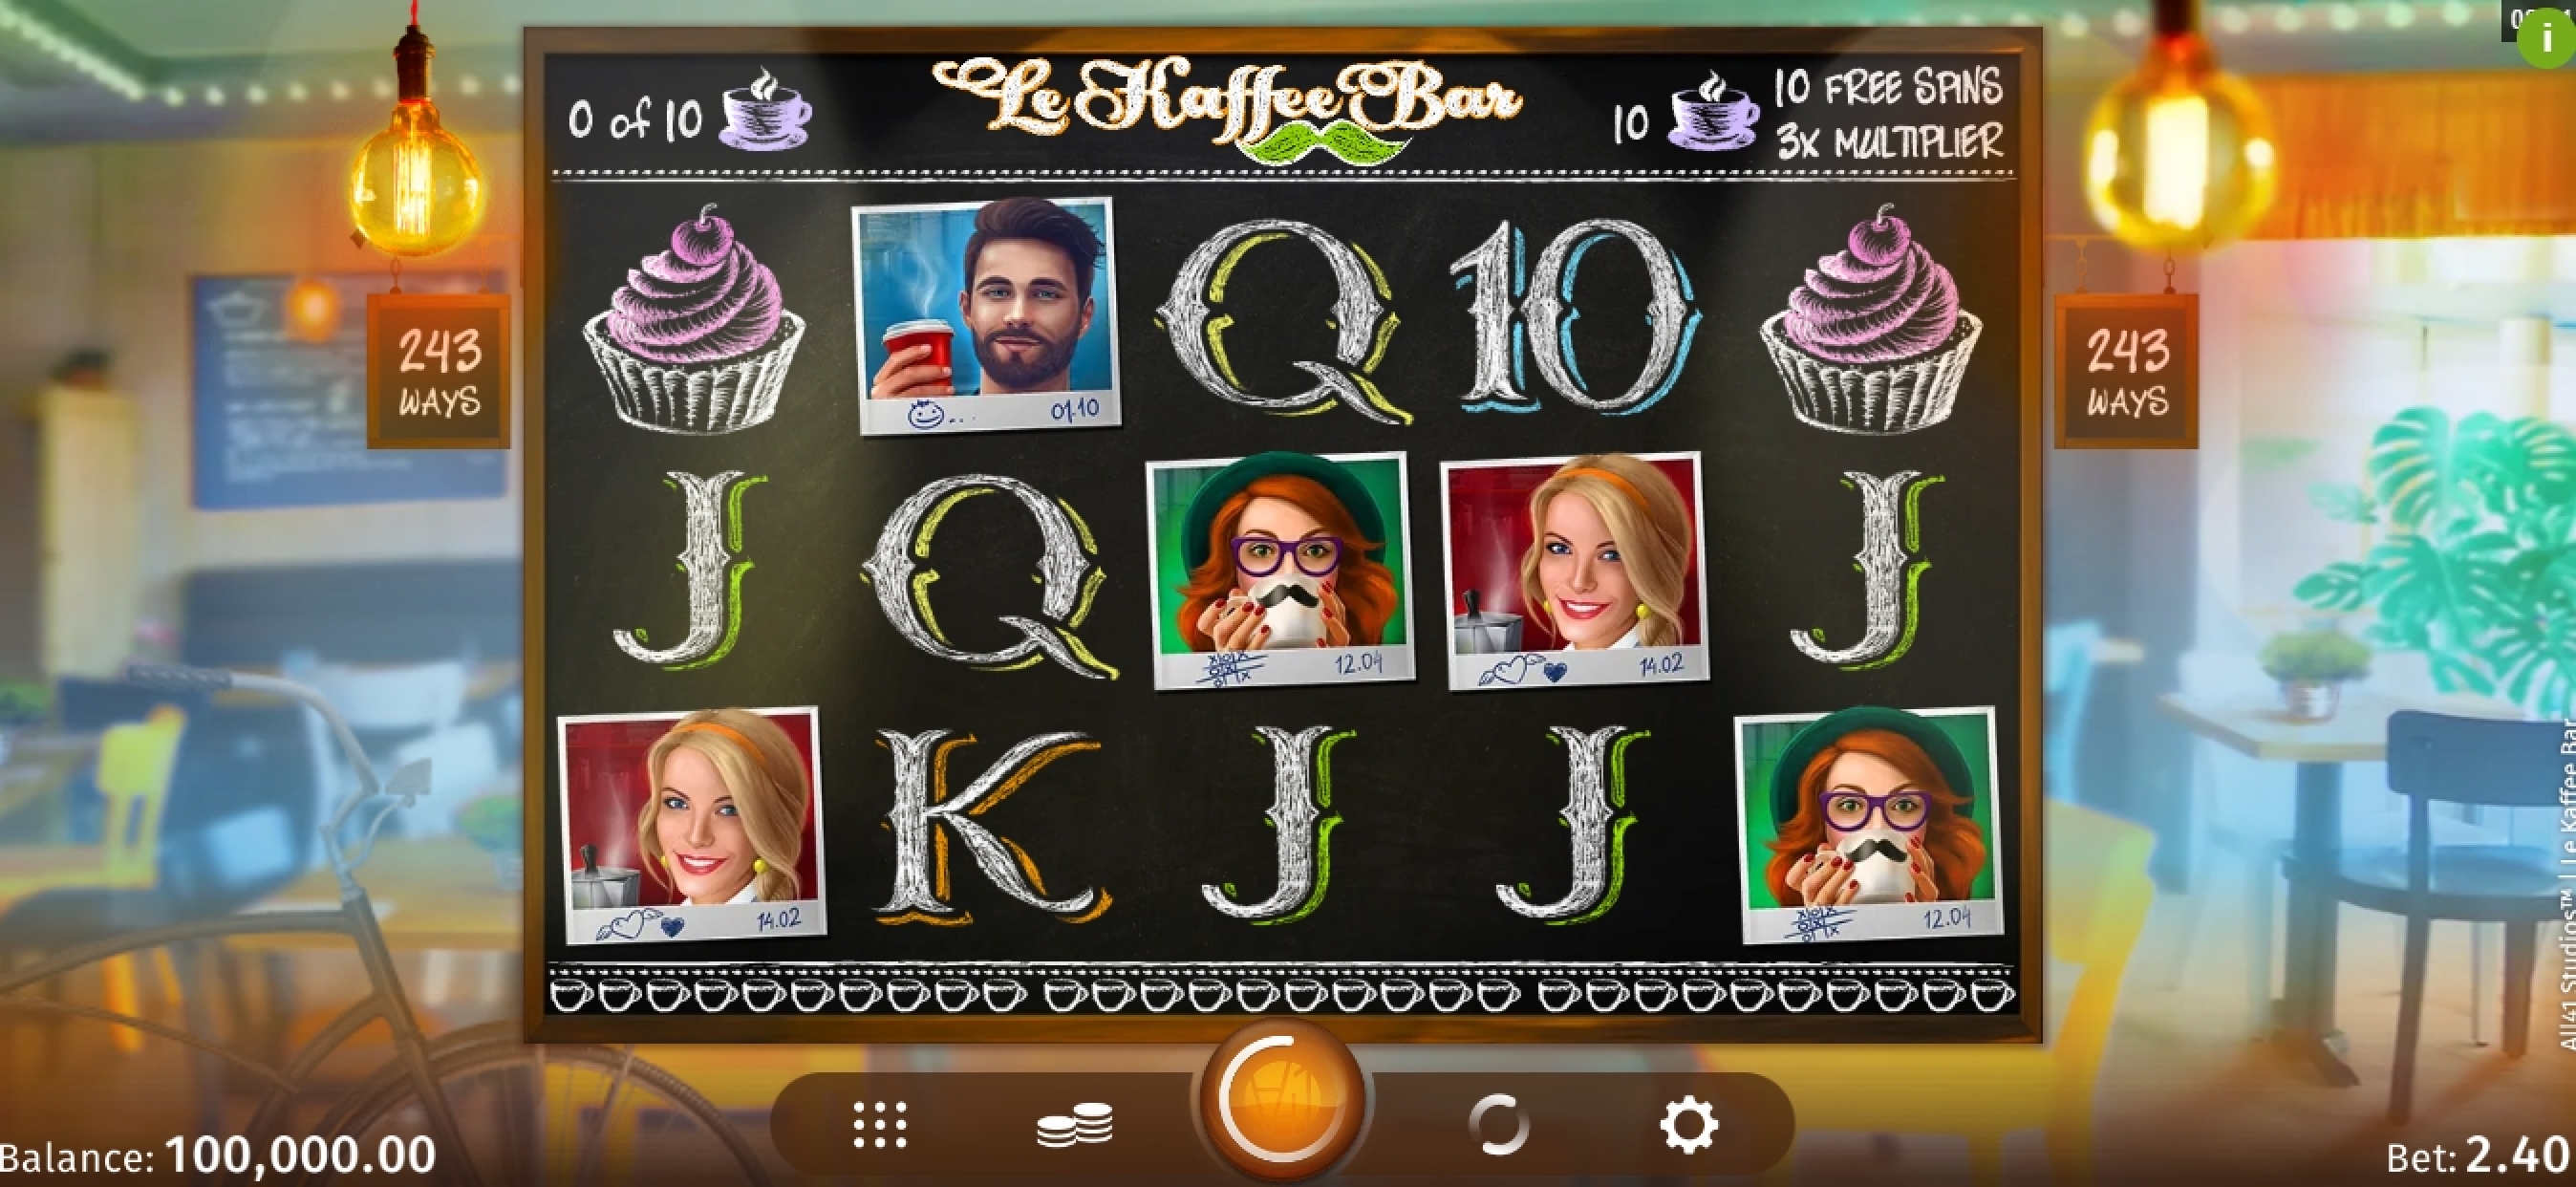 Reels in Le Kaffee Bar Slot Game by All41 Studios